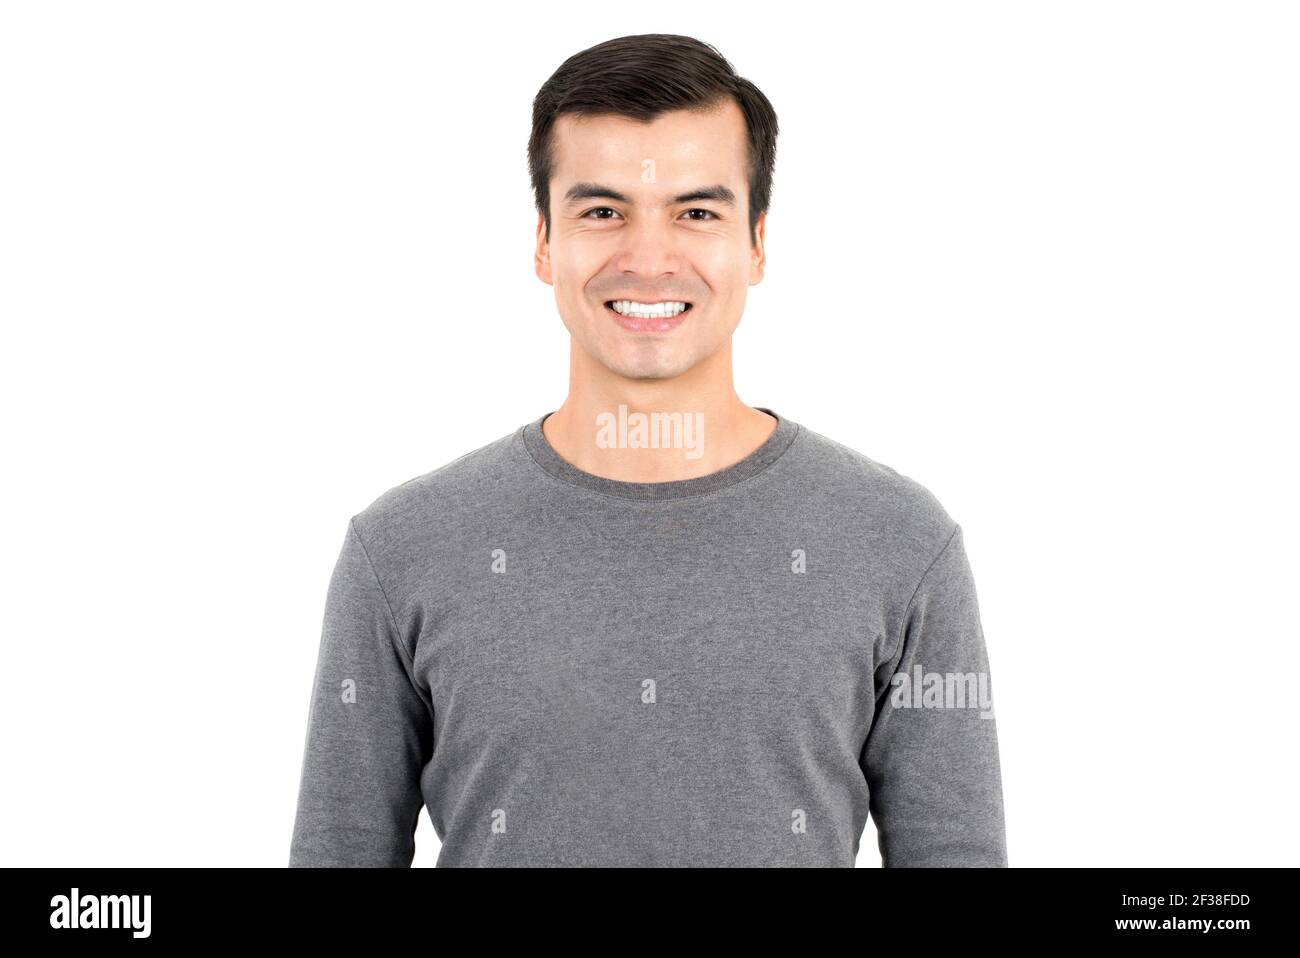 Portrait of happy smiling man wearing casual t-shirt, isolated on white background Stock Photo